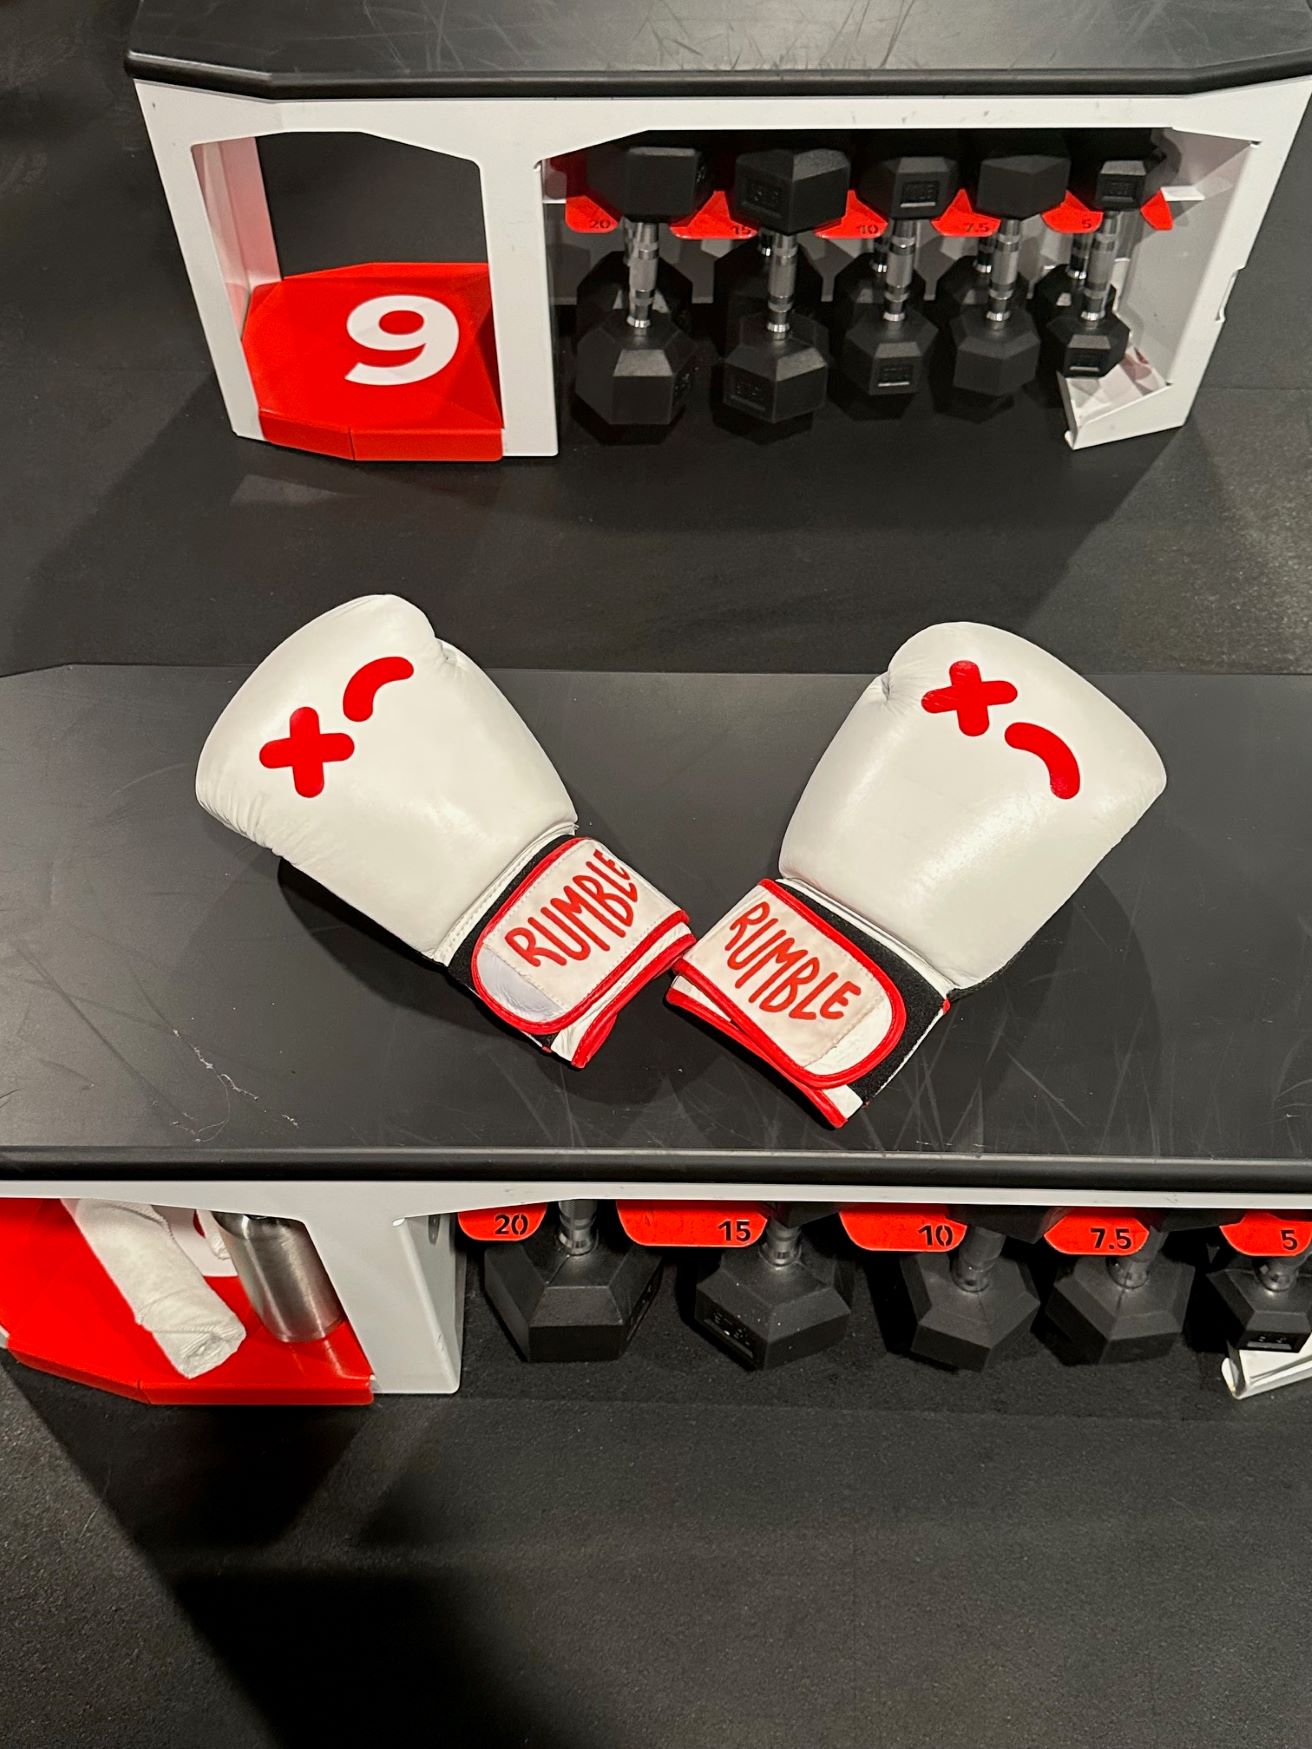 An image of Rumble boxing gloves.